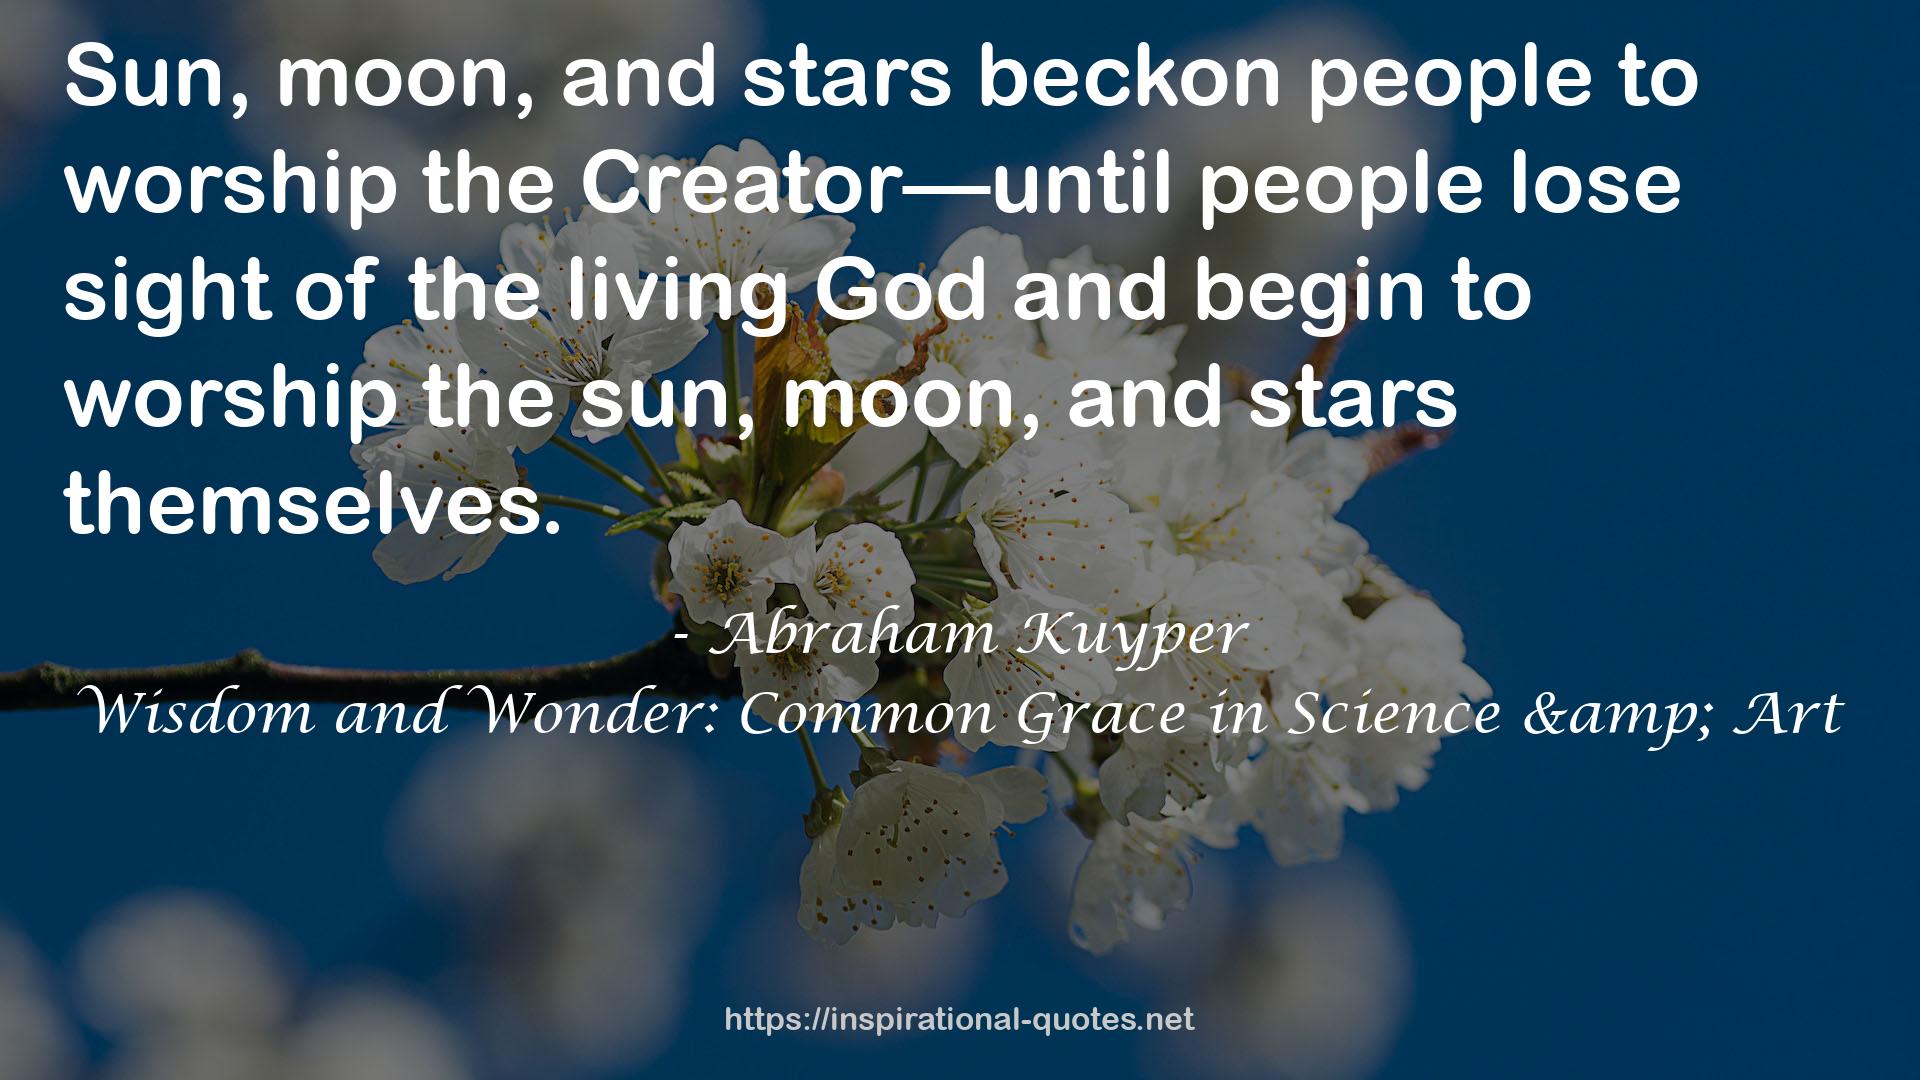 Wisdom and Wonder: Common Grace in Science & Art QUOTES